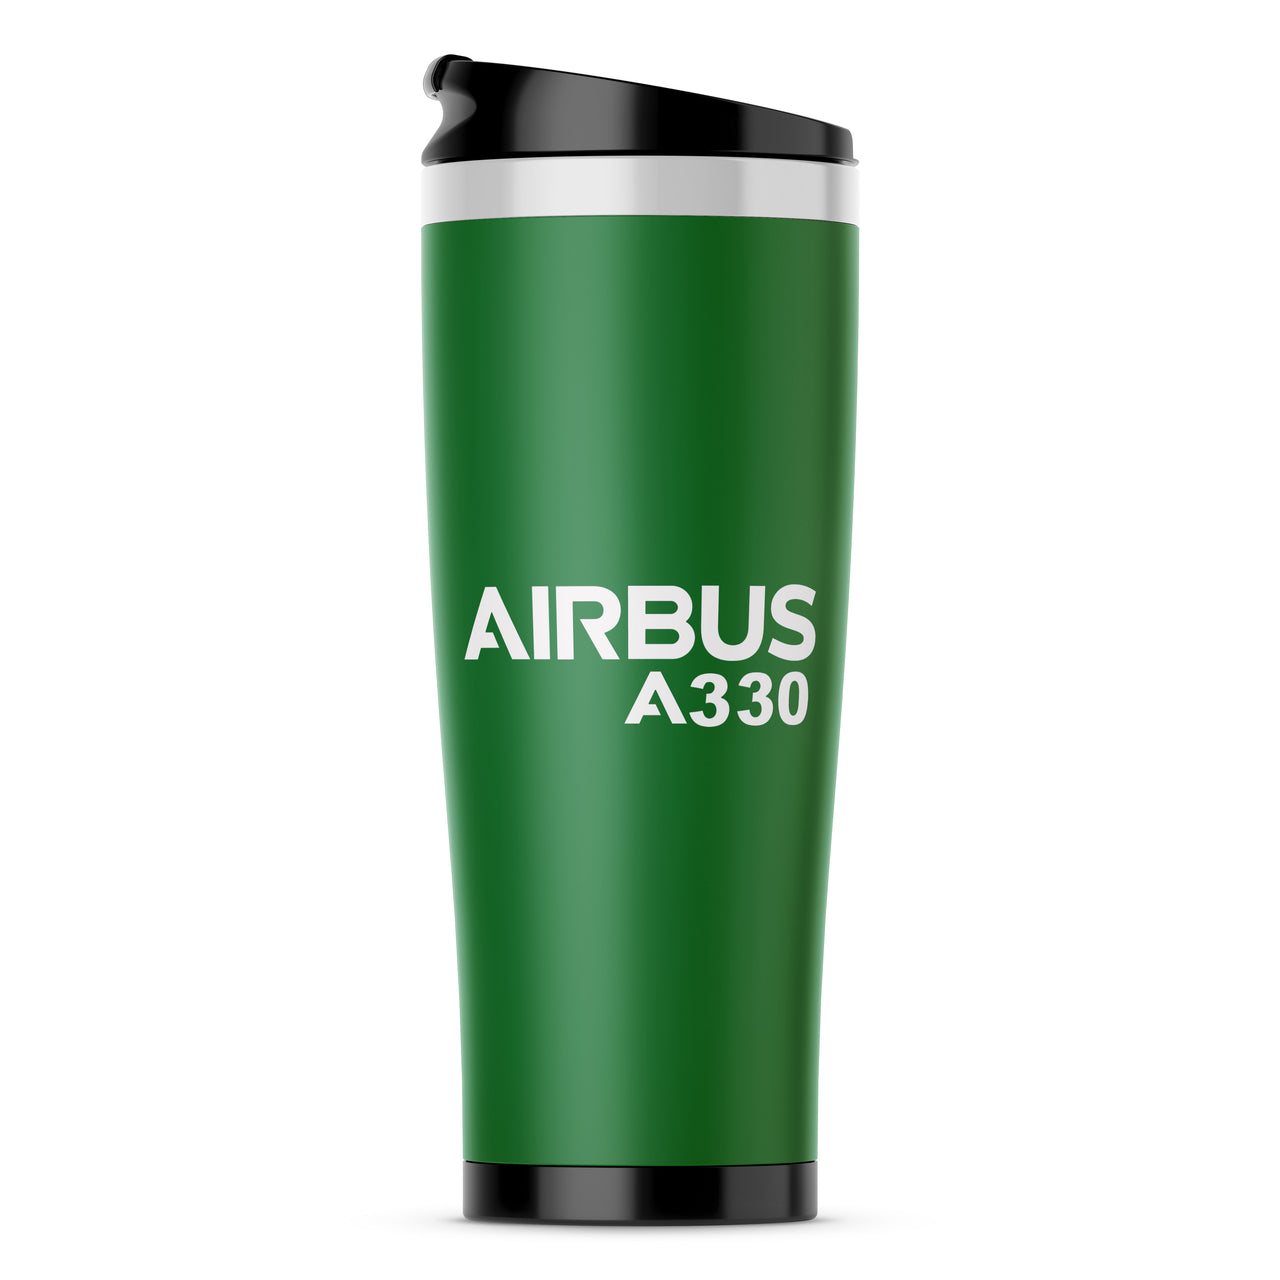 Airbus A330 & Text Designed Travel Mugs